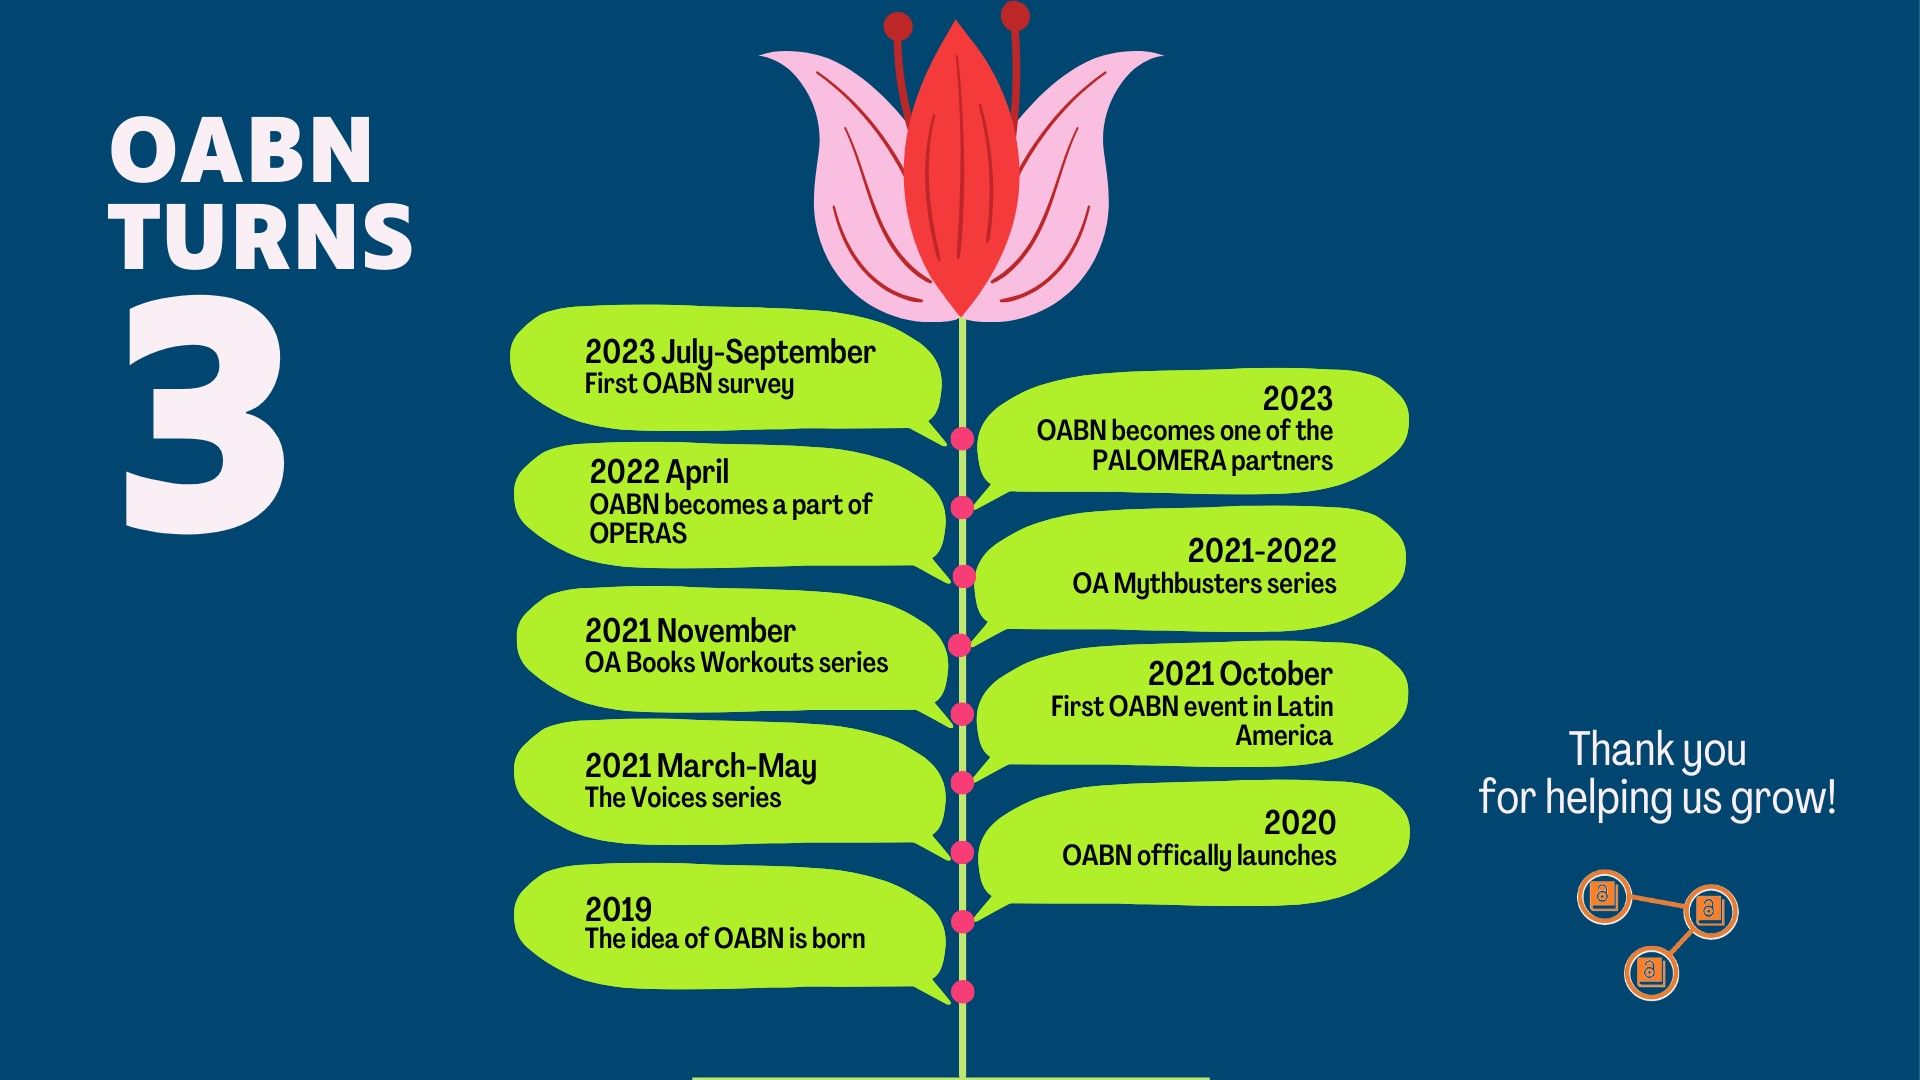 A timeline to celebrate the OABN turning 3: stylised to look like a growing flower with significant events in the OABN's history as leaves.